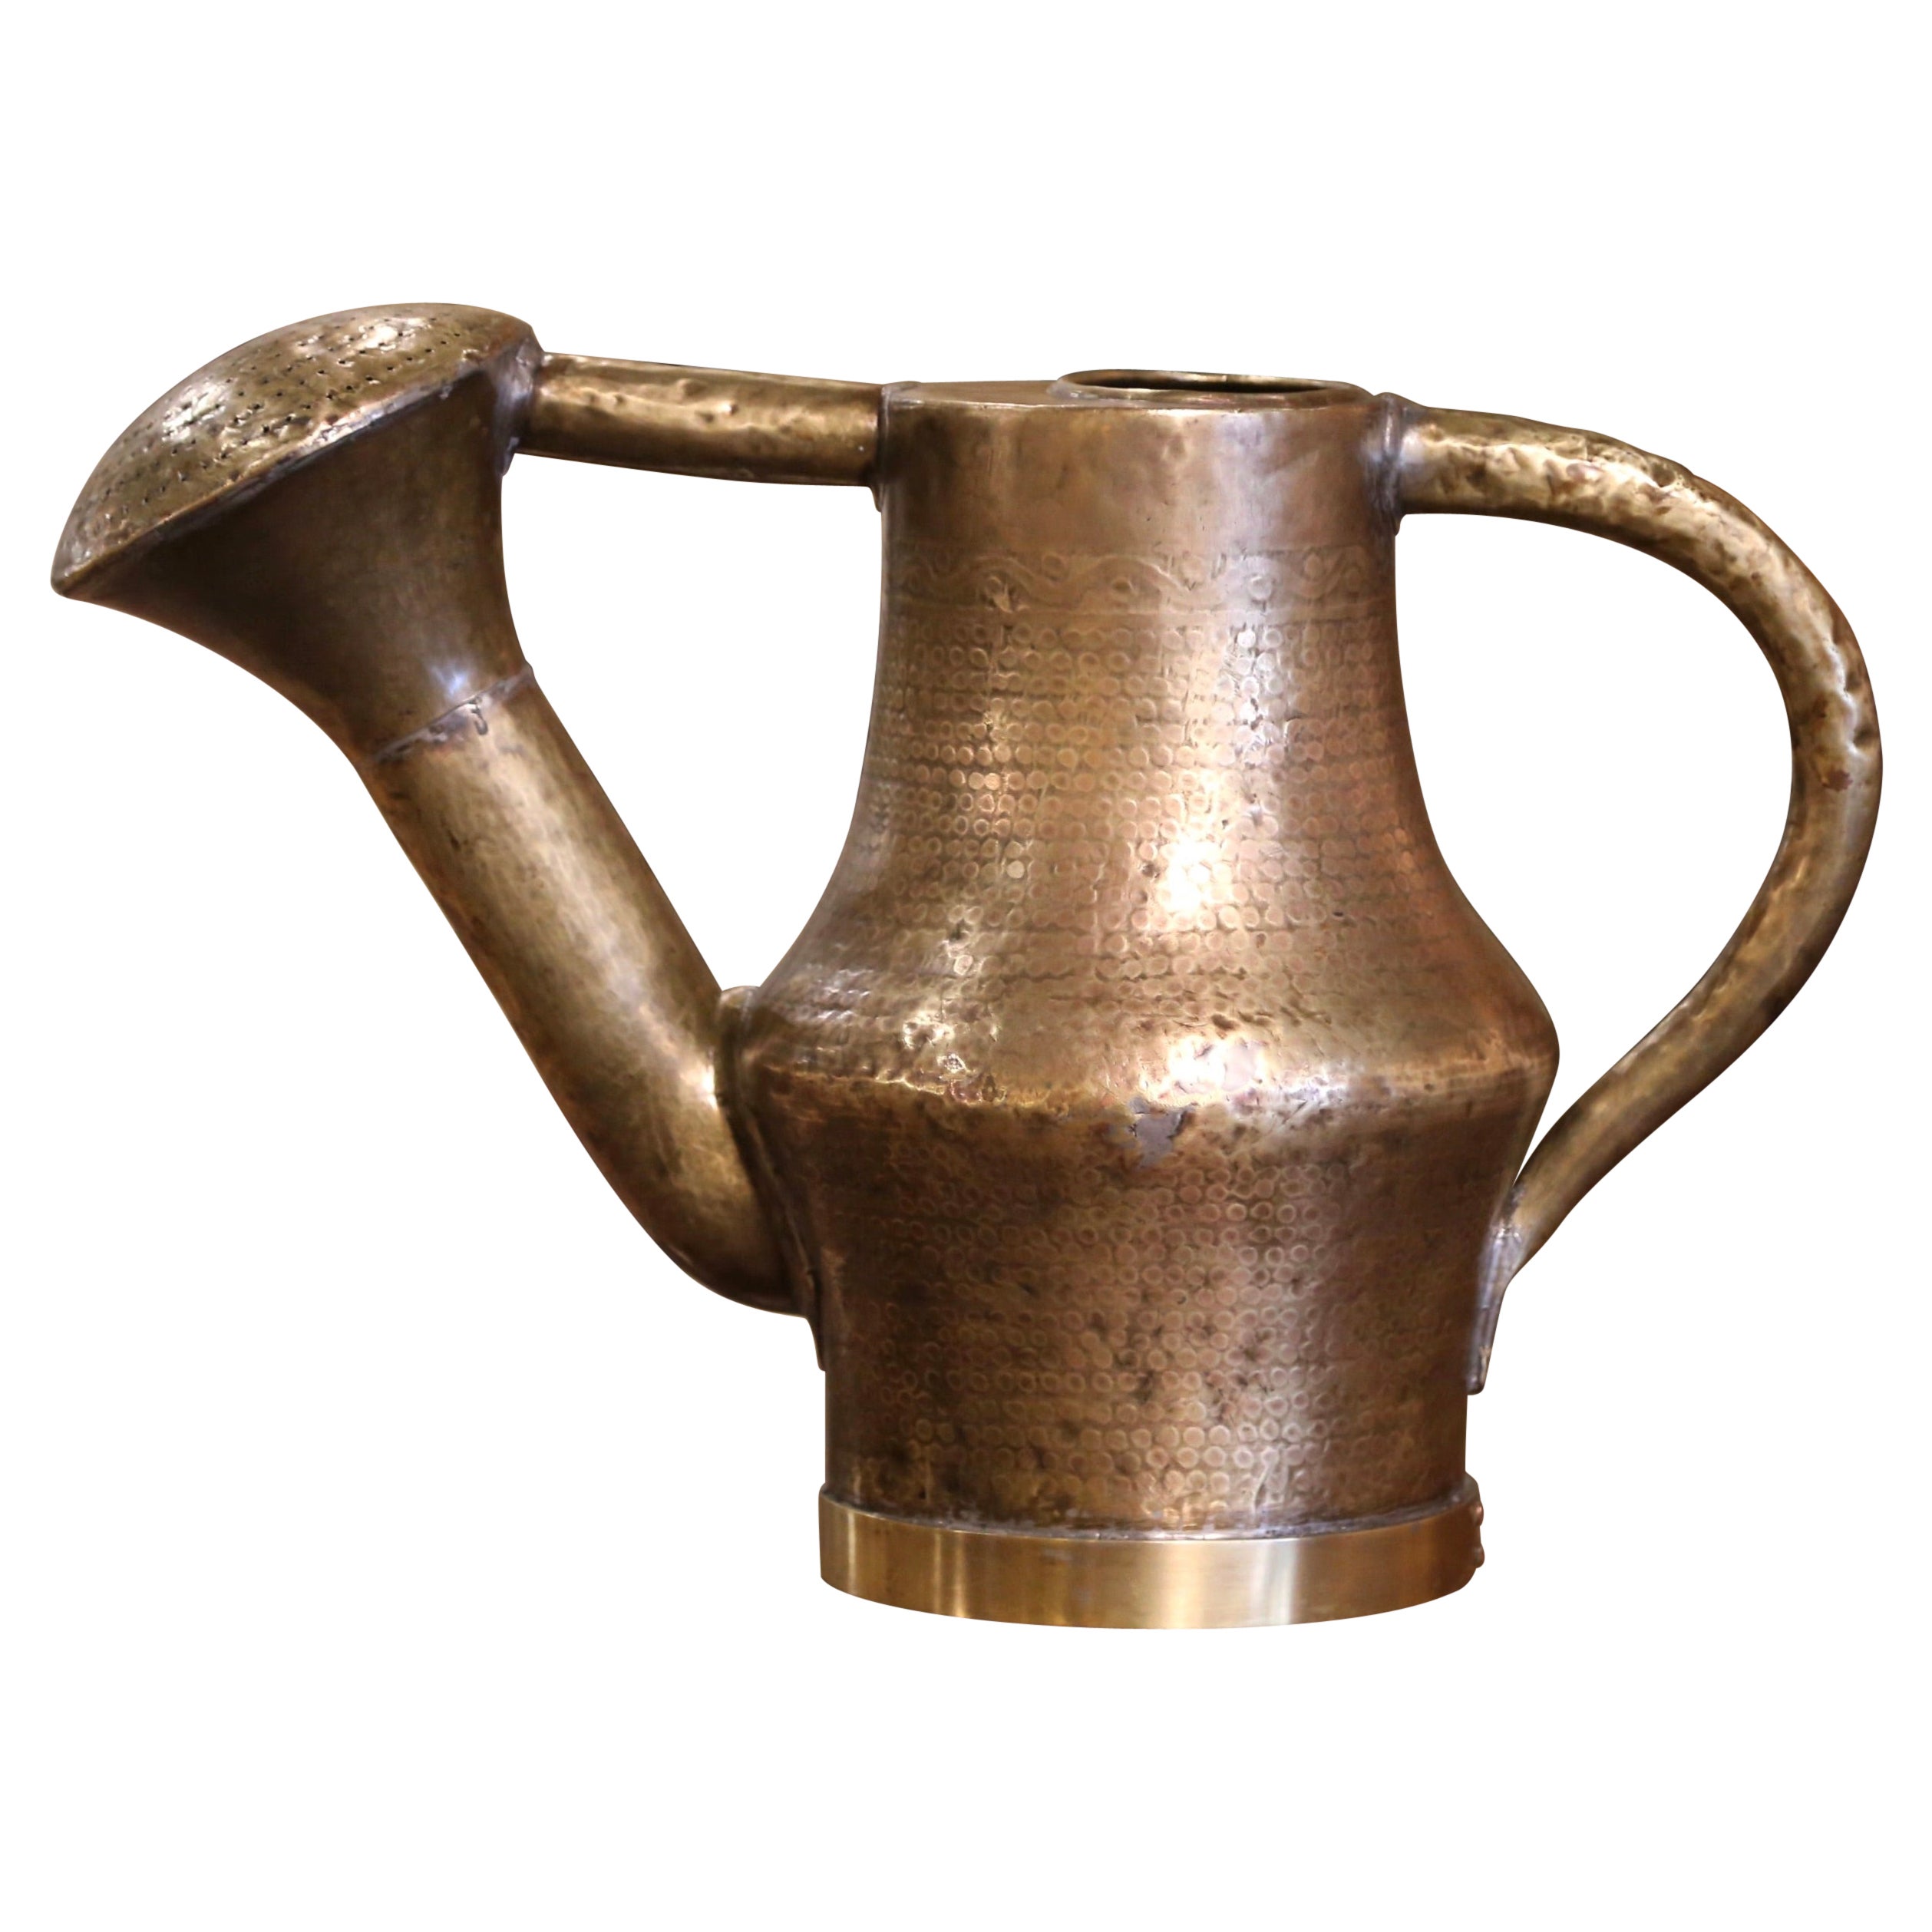 What is the best type of watering can?